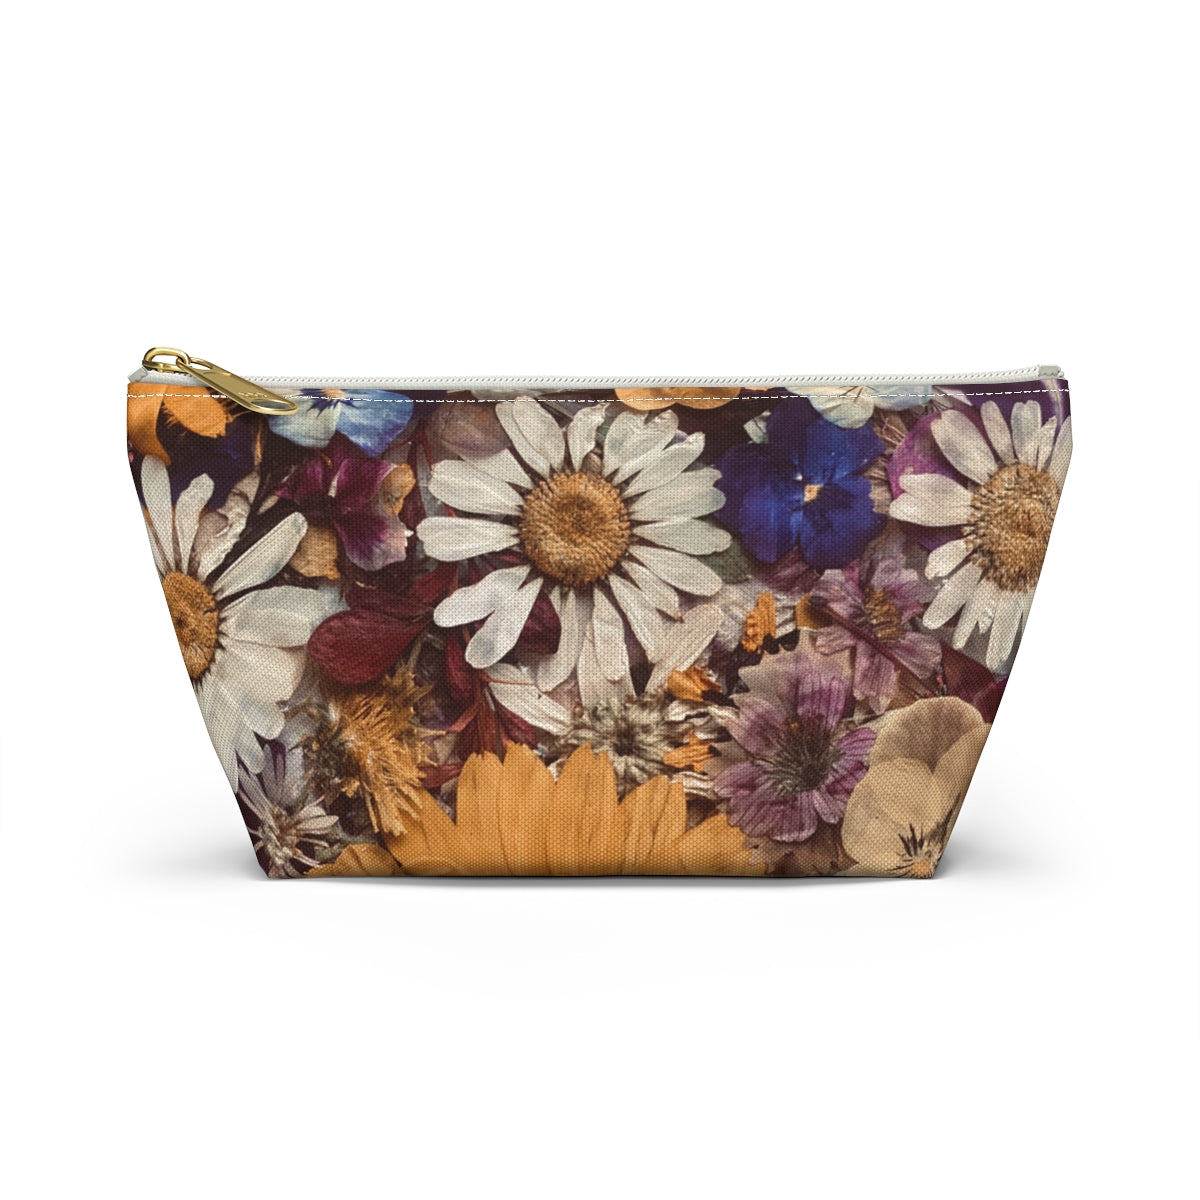 Memories - Pressed Flower Accessory Pouch